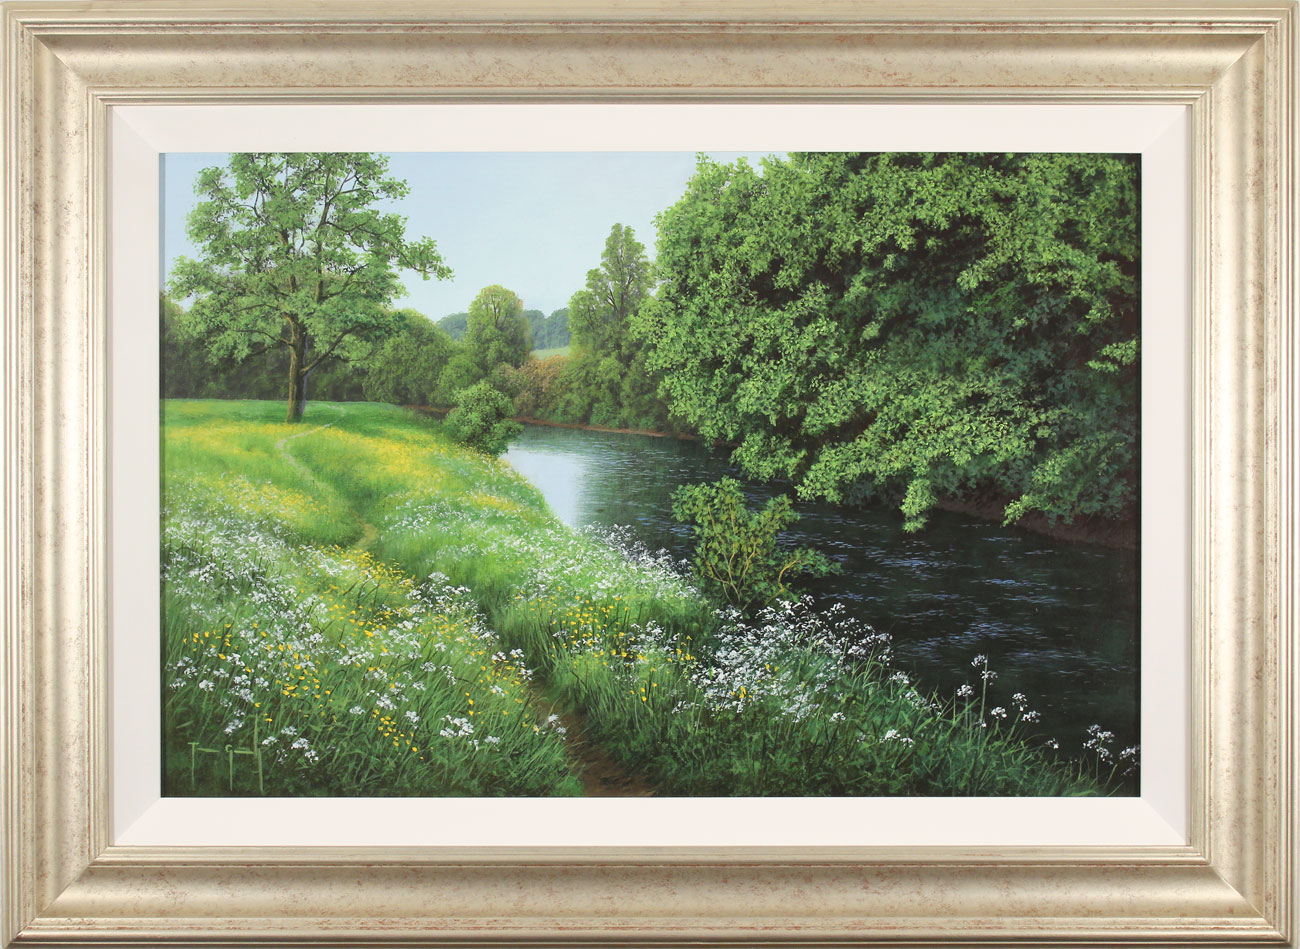 Terry Grundy, Original oil painting on panel, Midsummer by the River, click to enlarge